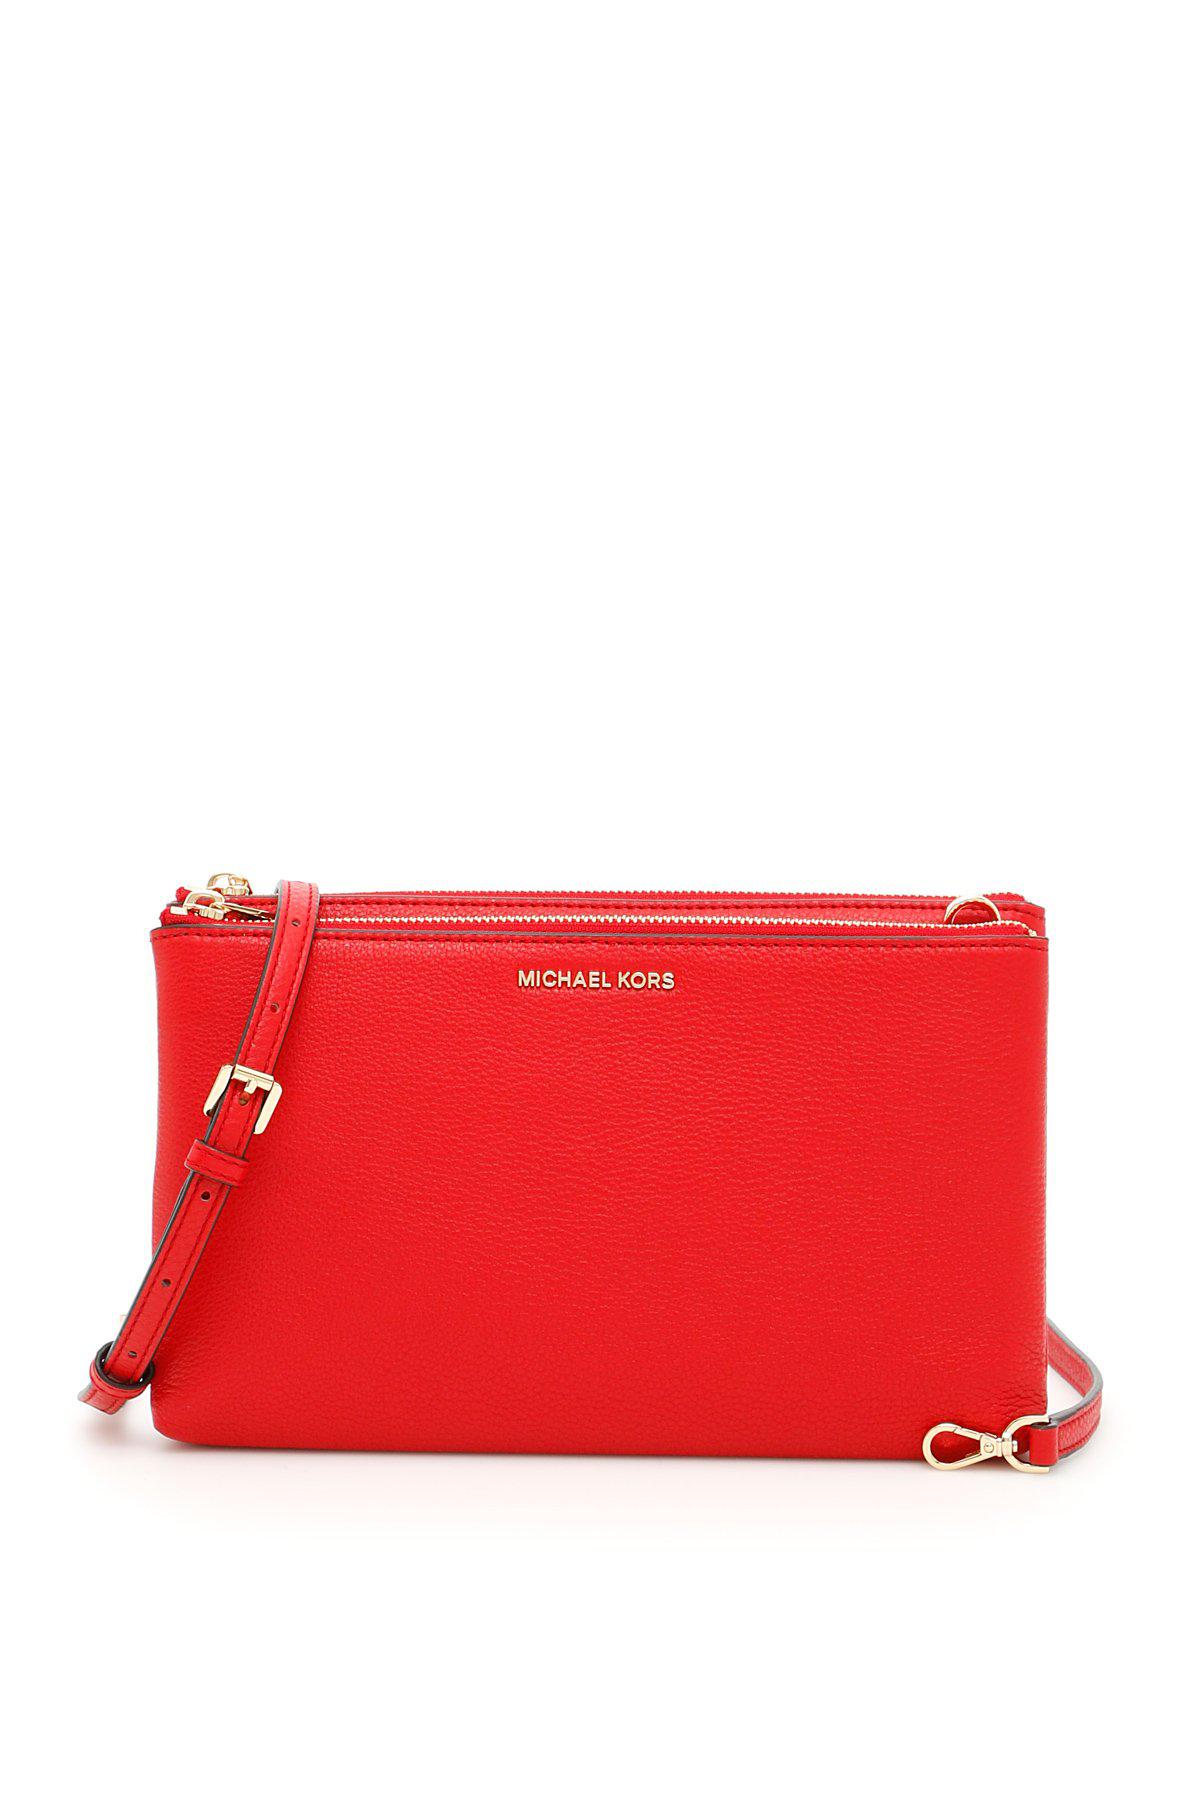 MICHAEL Michael Kors Leather Adele Crossbody Bag in Bright Red (Red) - Lyst